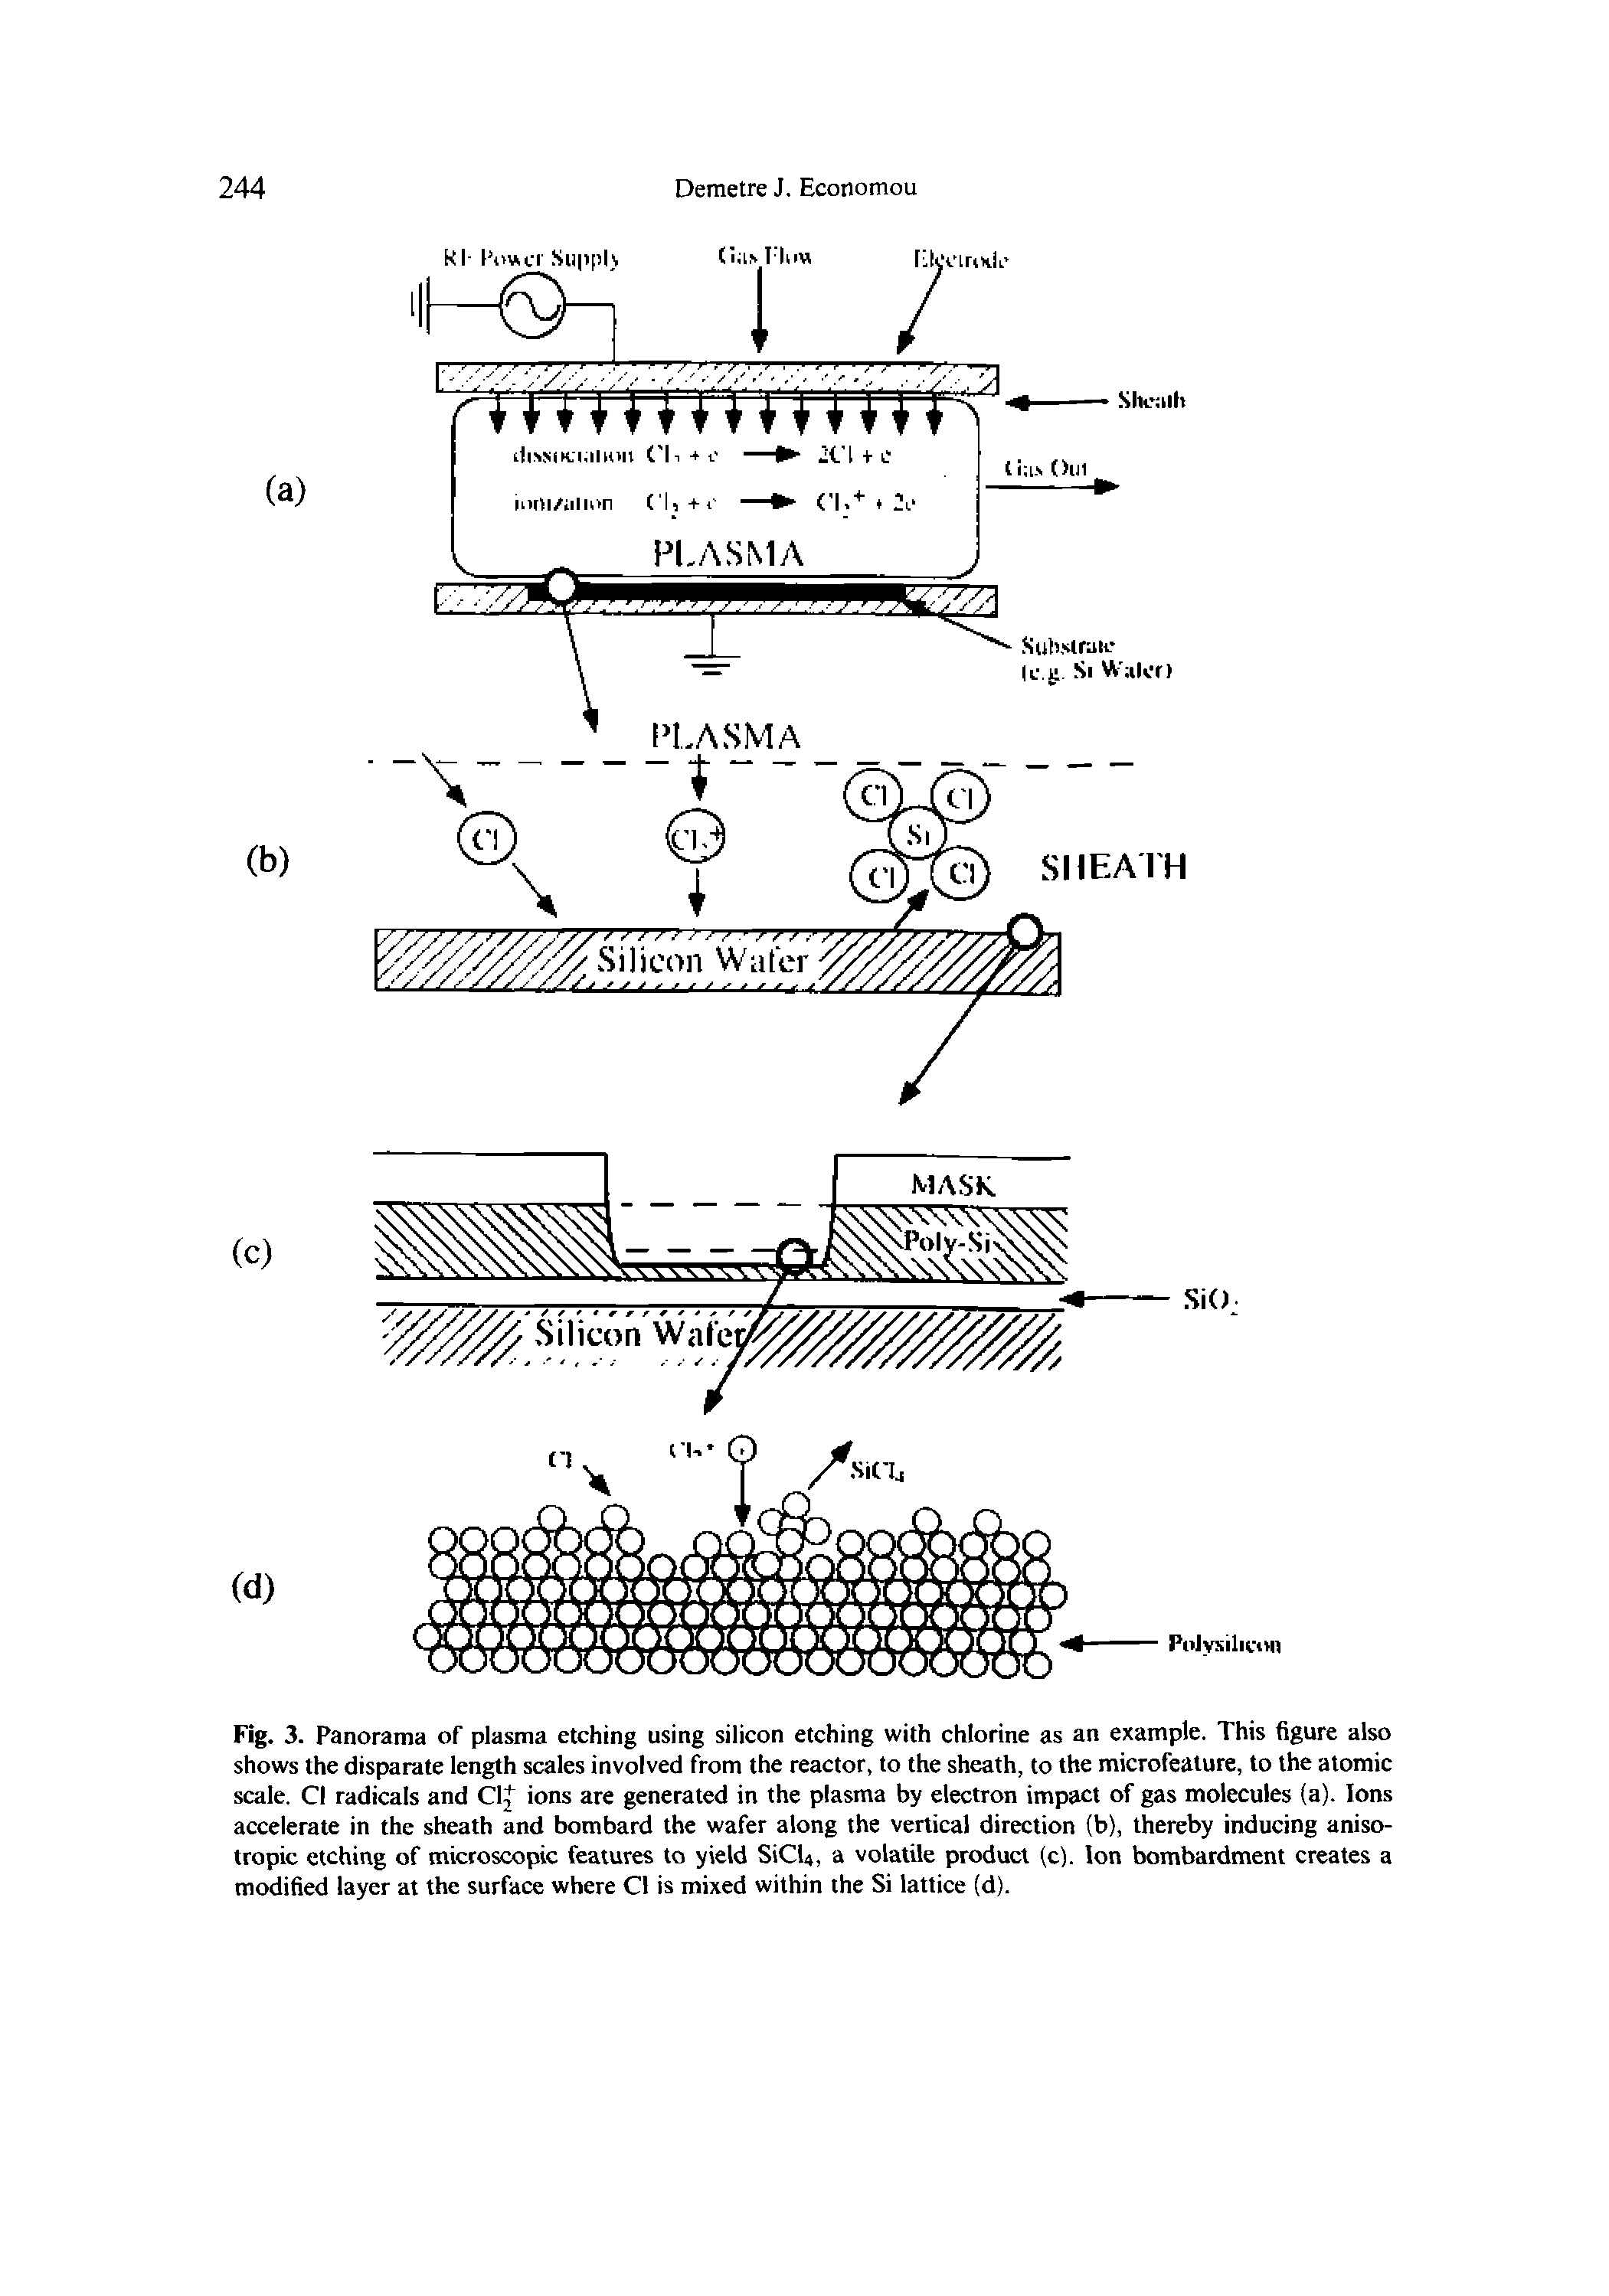 Fig. 3. Panorama of plasma etching using silicon etching with chlorine as an example. This figure also shows the disparate length scales involved from the reactor, to the sheath, to the microfeature, to the atomic scale. Cl radicals and CIJ ions are generated in the plasma by electron impact of gas molecules (a). Ions accelerate in the sheath and bombard the wafer along the vertical direction (b), thereby inducing anisotropic etching of microscopic features to yield SiCU, a volatile product (c). Ion bombardment creates a modified layer at the surface where Cl is mixed within the Si lattice (d).